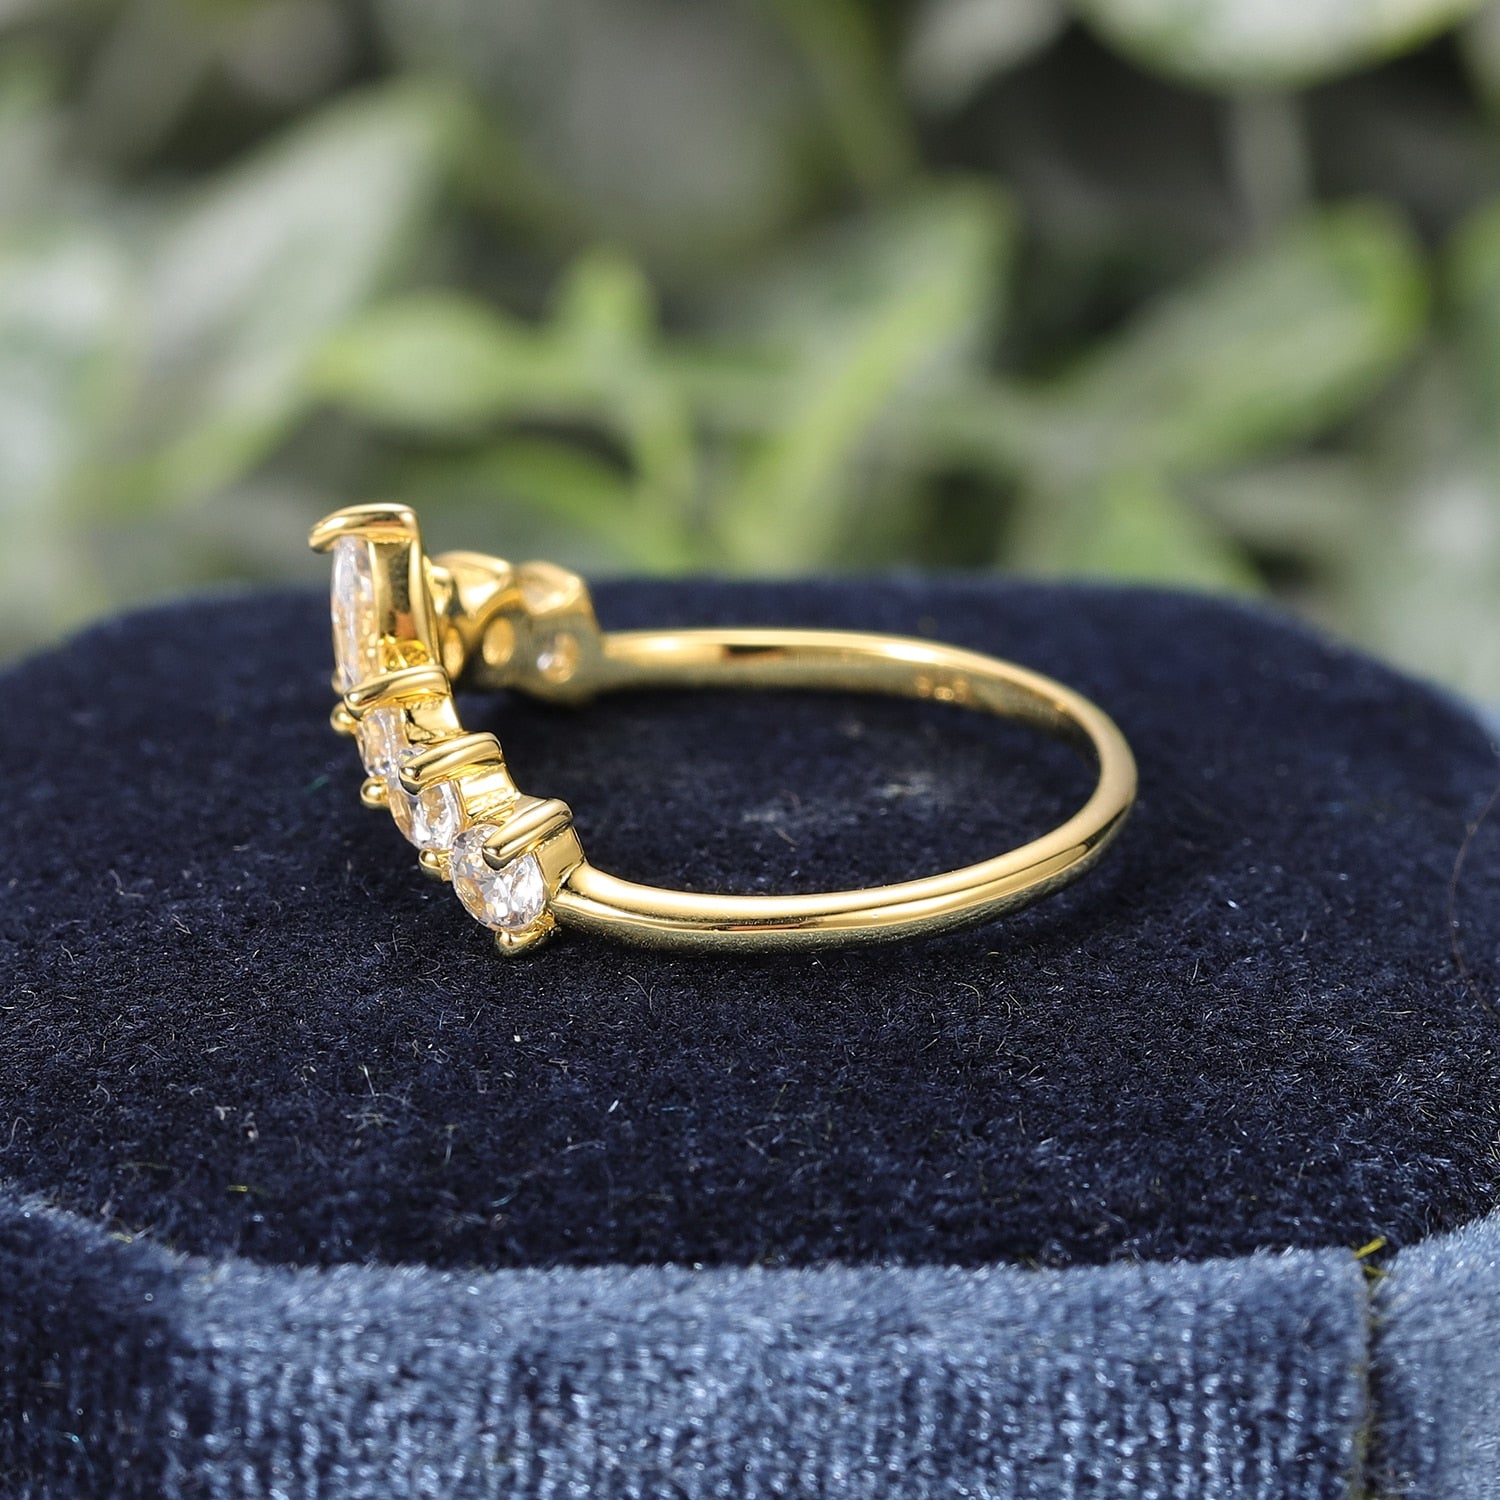 A gold slightly curved wedding ring with small round moissanites and a marquise moissanite in the center.